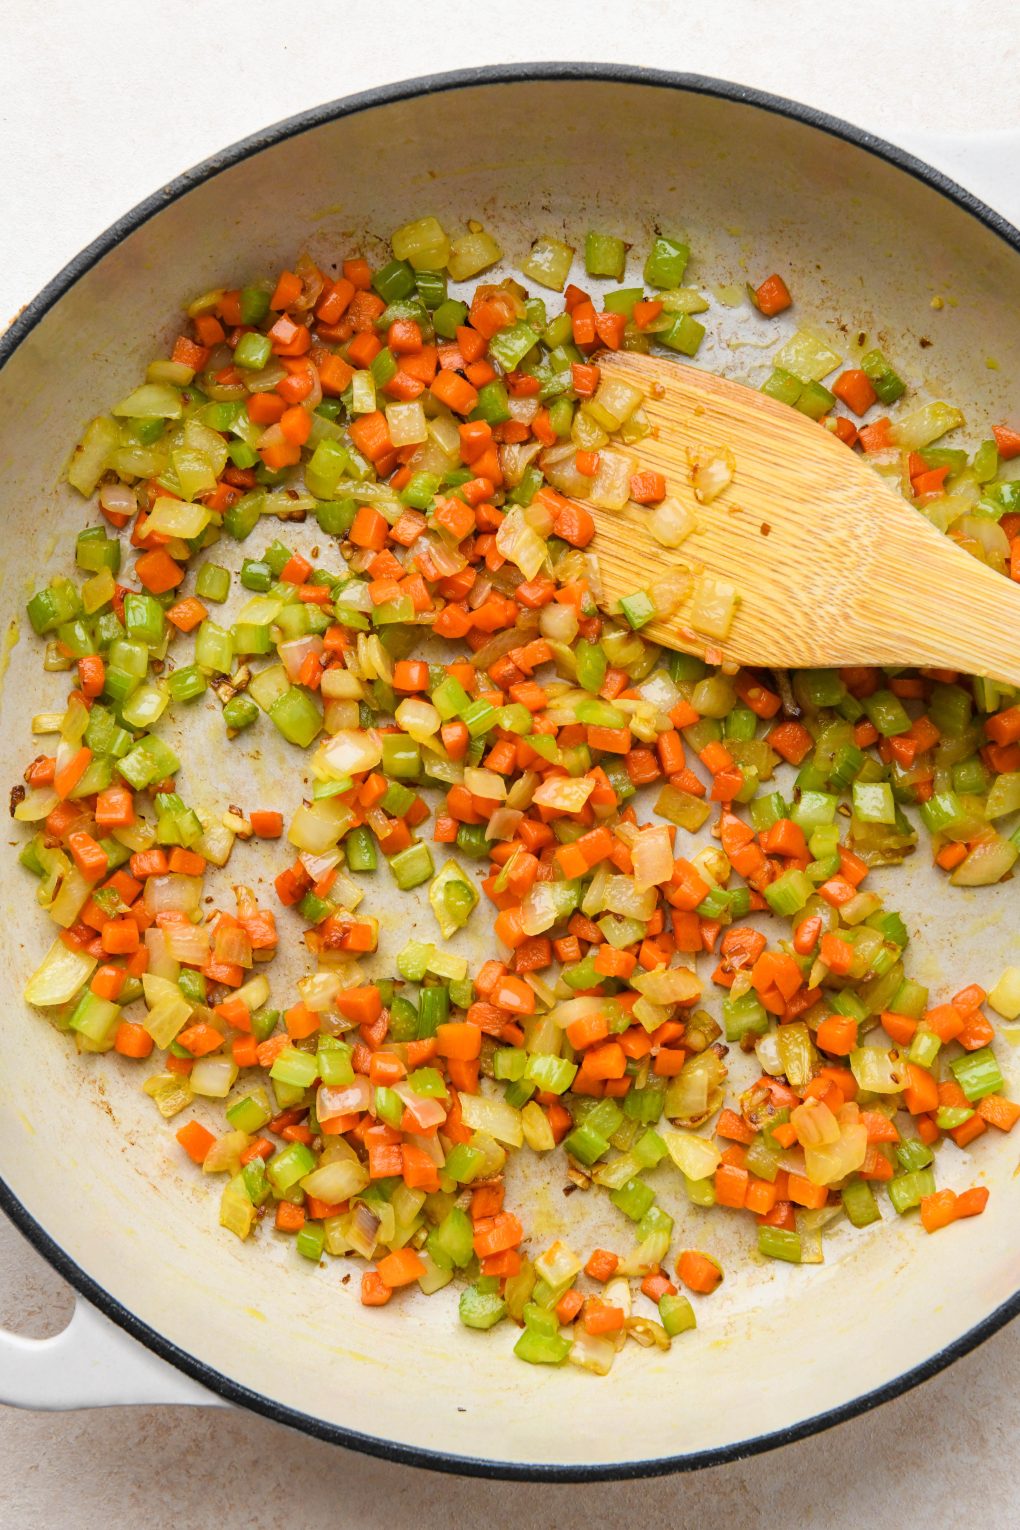 How to make classic Whole30 meatloaf: Sautéing diced onions, carrots, and celery in a large ceramic skillet.